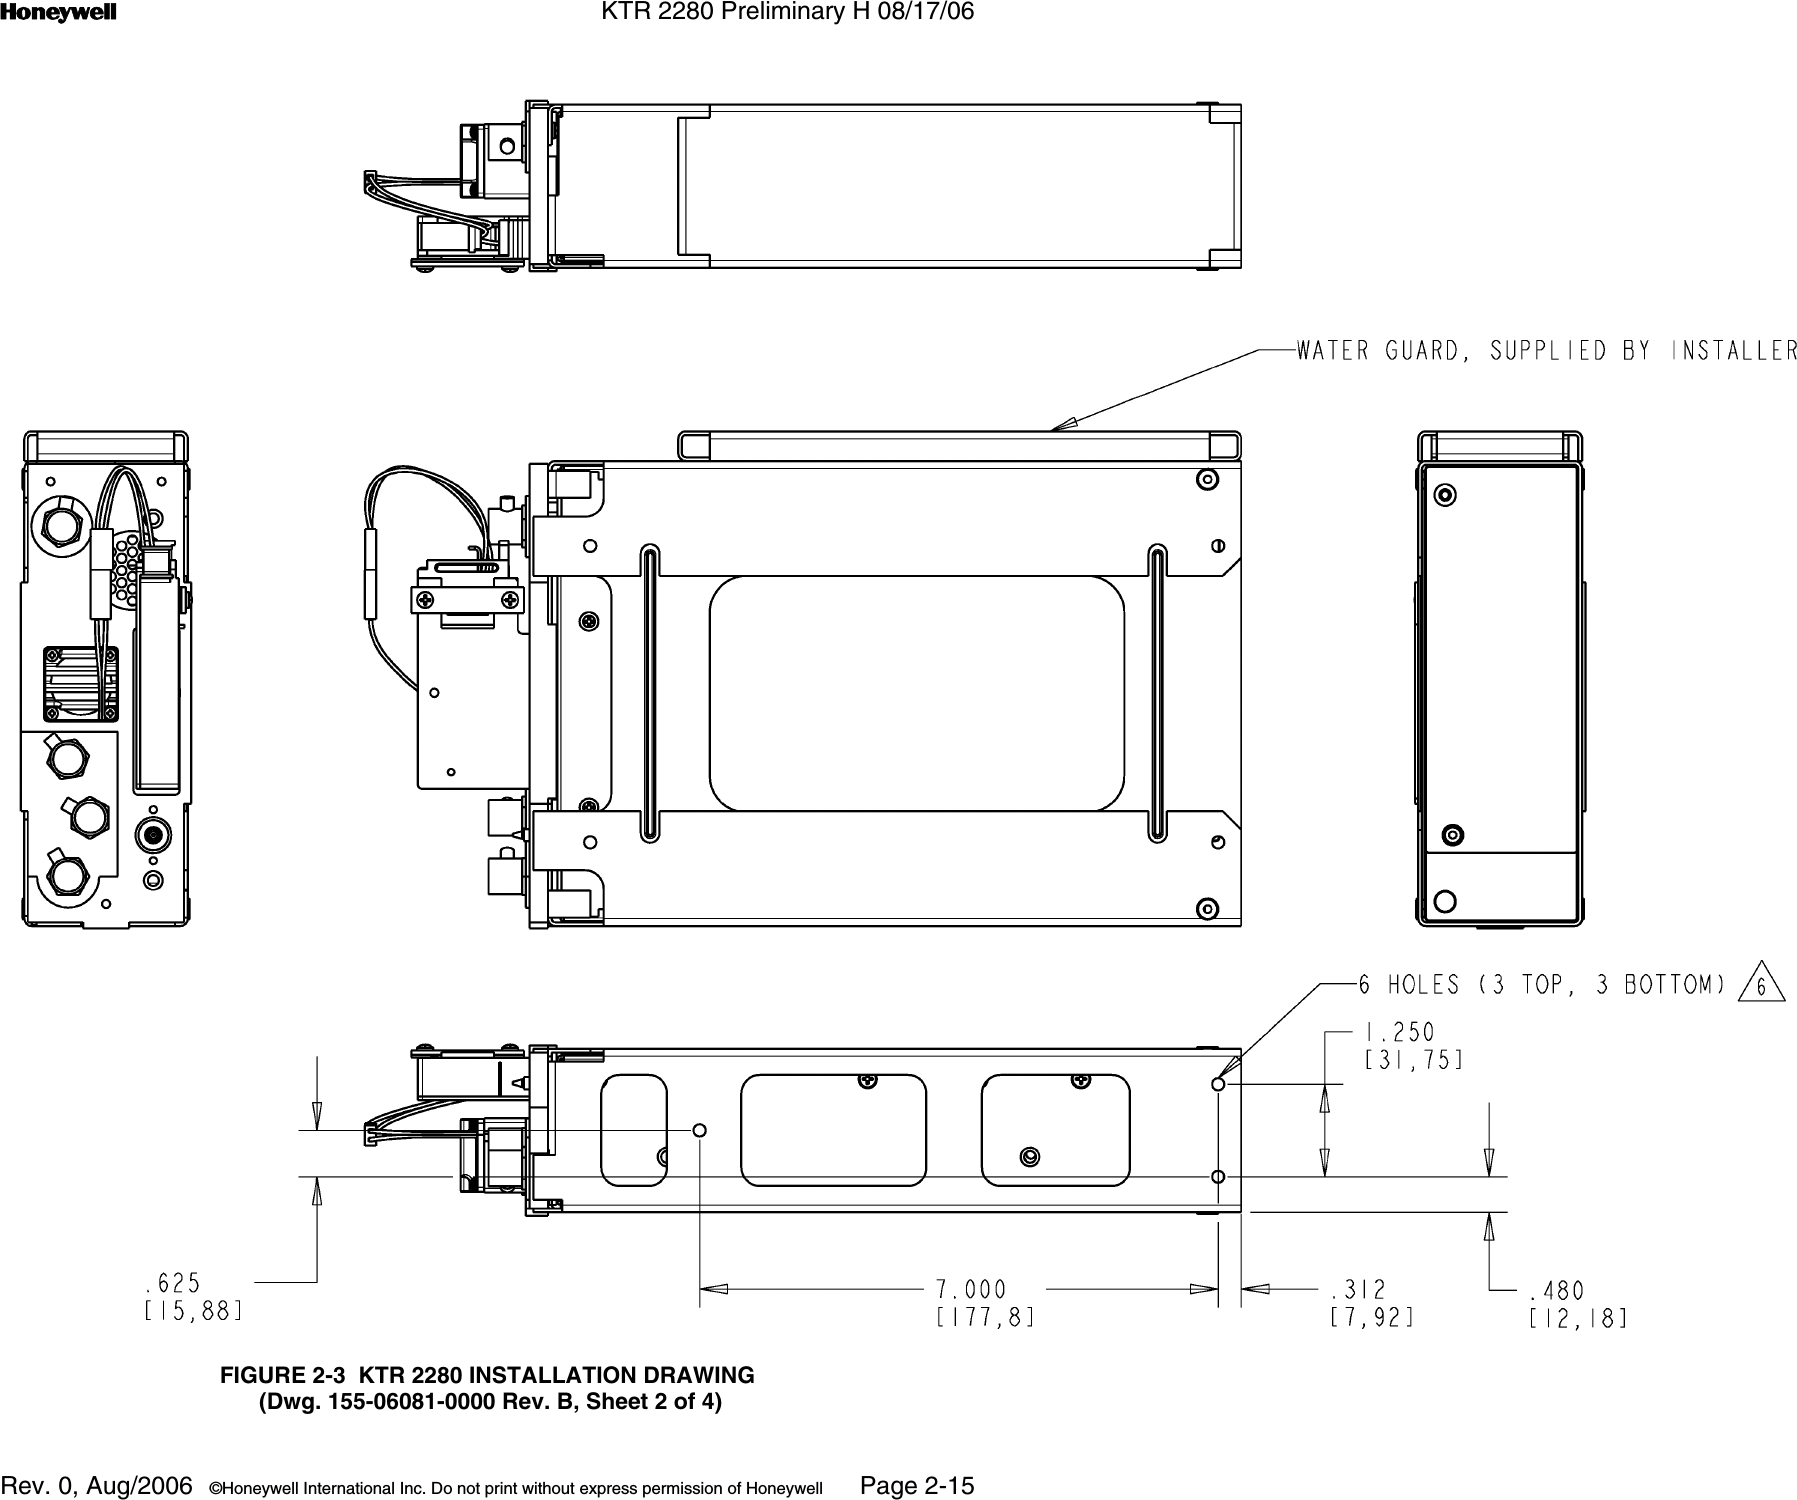 n KTR 2280 Preliminary H 08/17/06Rev. 0, Aug/2006  ©Honeywell International Inc. Do not print without express permission of Honeywell Page 2-15FIGURE 2-3  KTR 2280 INSTALLATION DRAWING (Dwg. 155-06081-0000 Rev. B, Sheet 2 of 4)